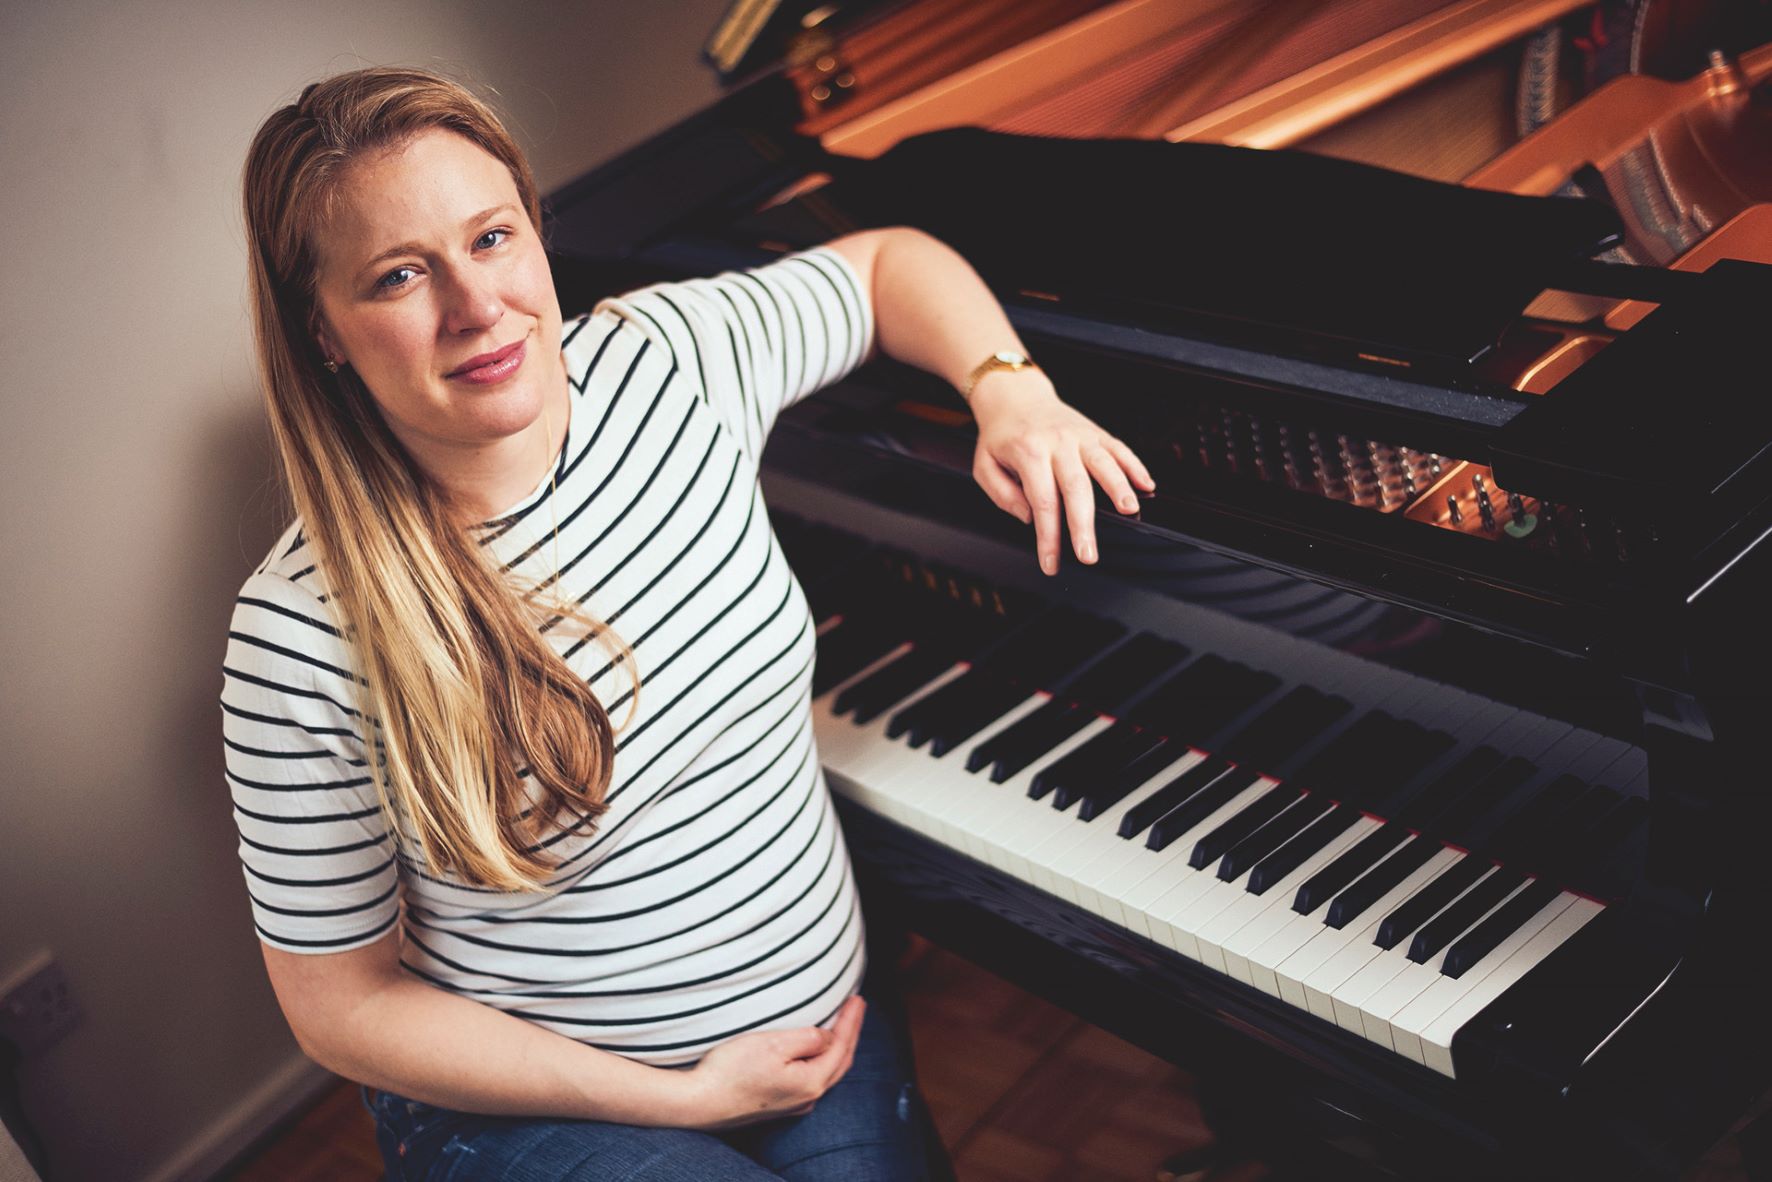 Pregnant Jocelyn Freeman sits, one hand on her baby bump, another on a piano.